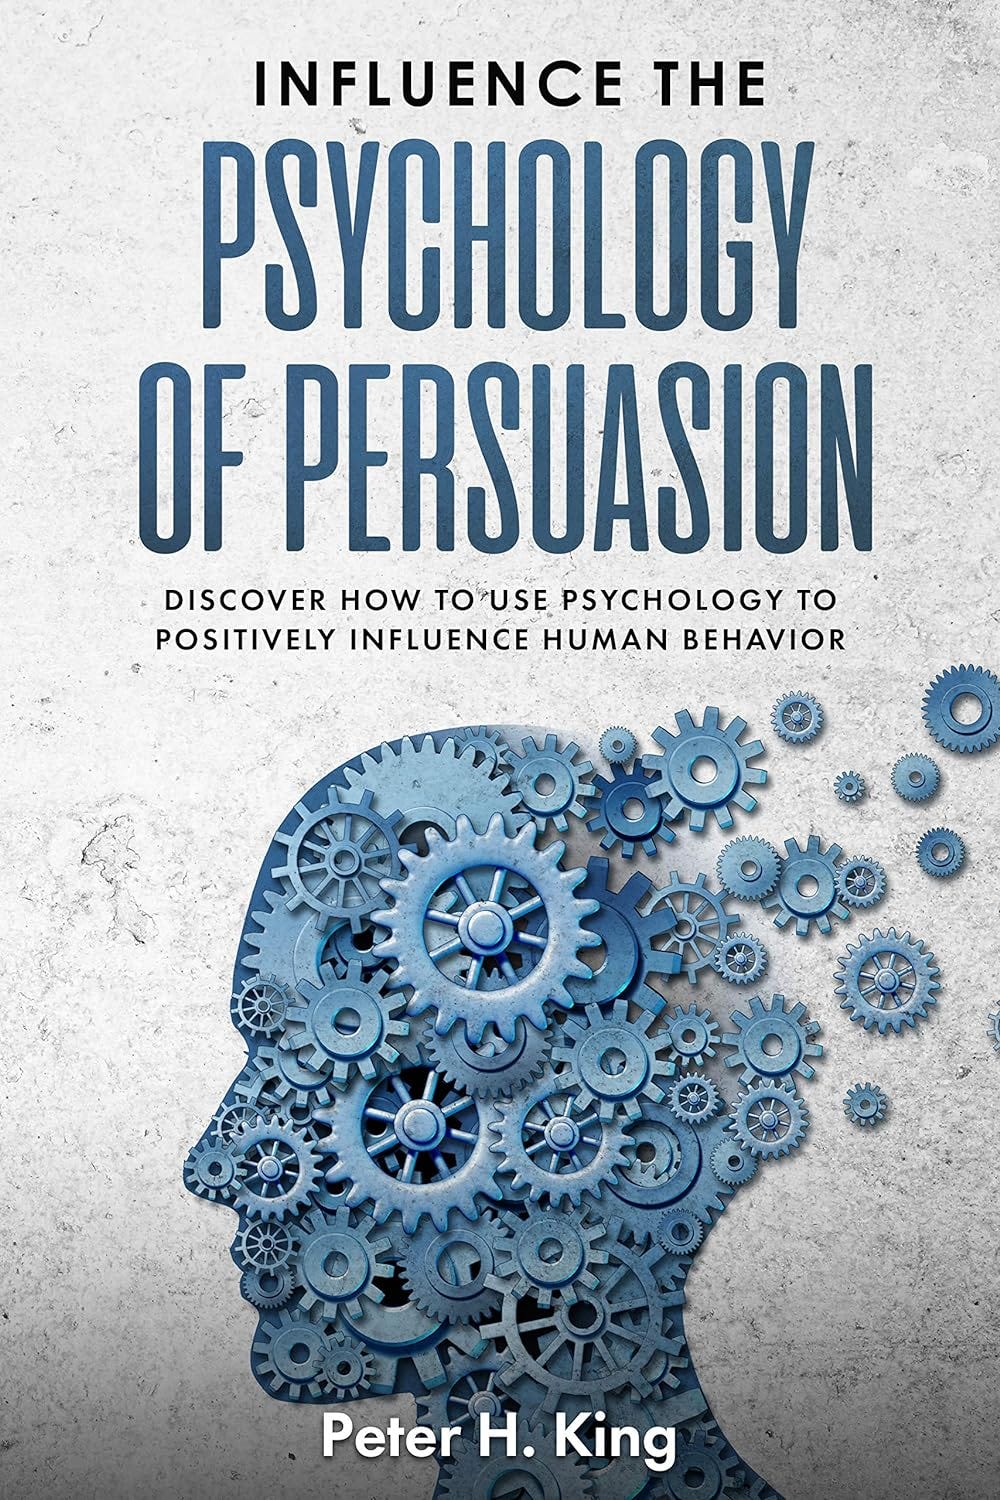 Influence: The Psychology of Persuasion | by SocialVibes | Oct